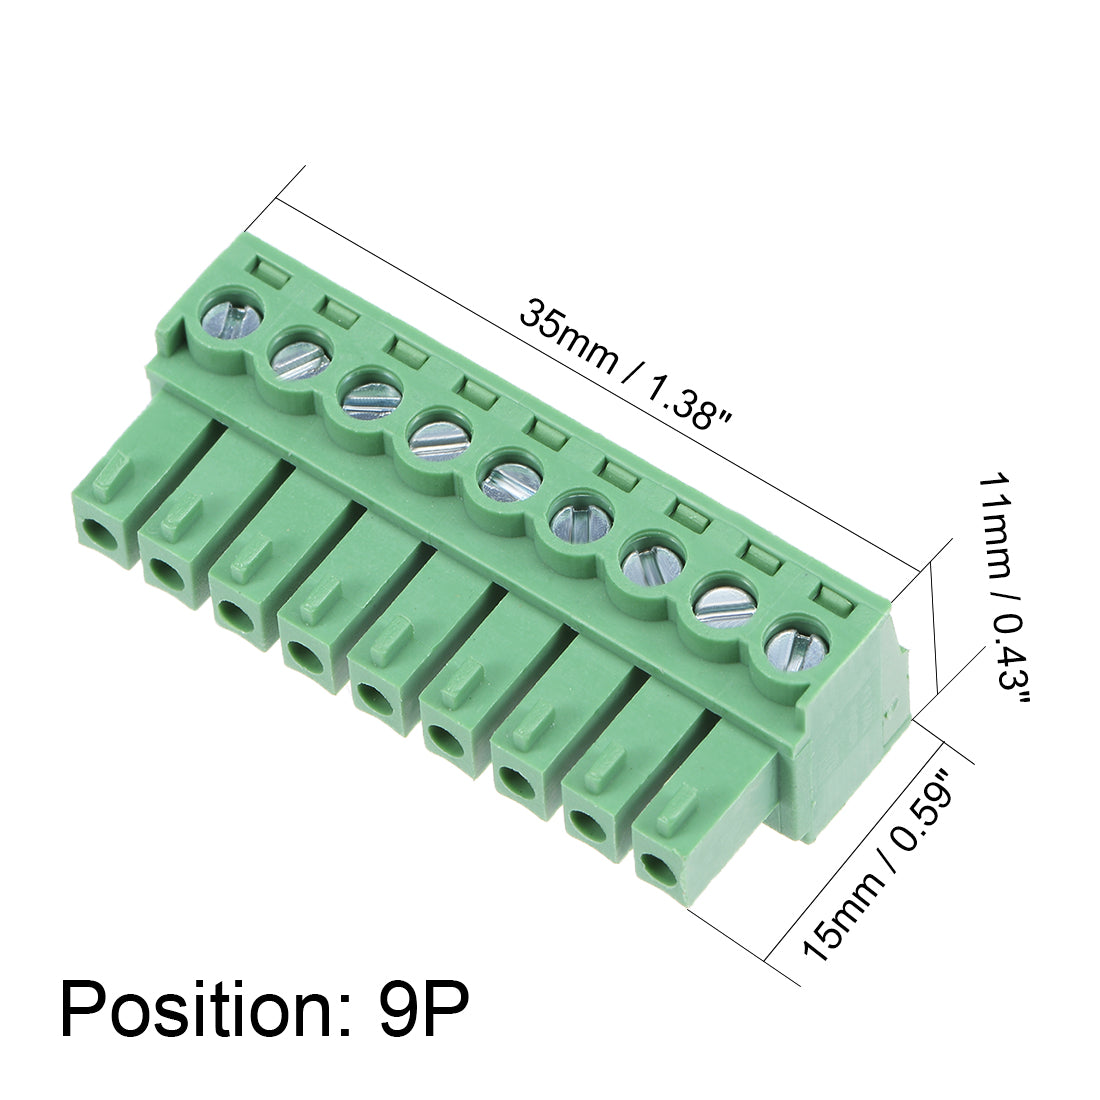 uxcell Uxcell 6Pcs AC300V 8A 3.81mm Pitch 9P Flat Angle Needle Seat Insert-In PCB Terminal Block Connector green